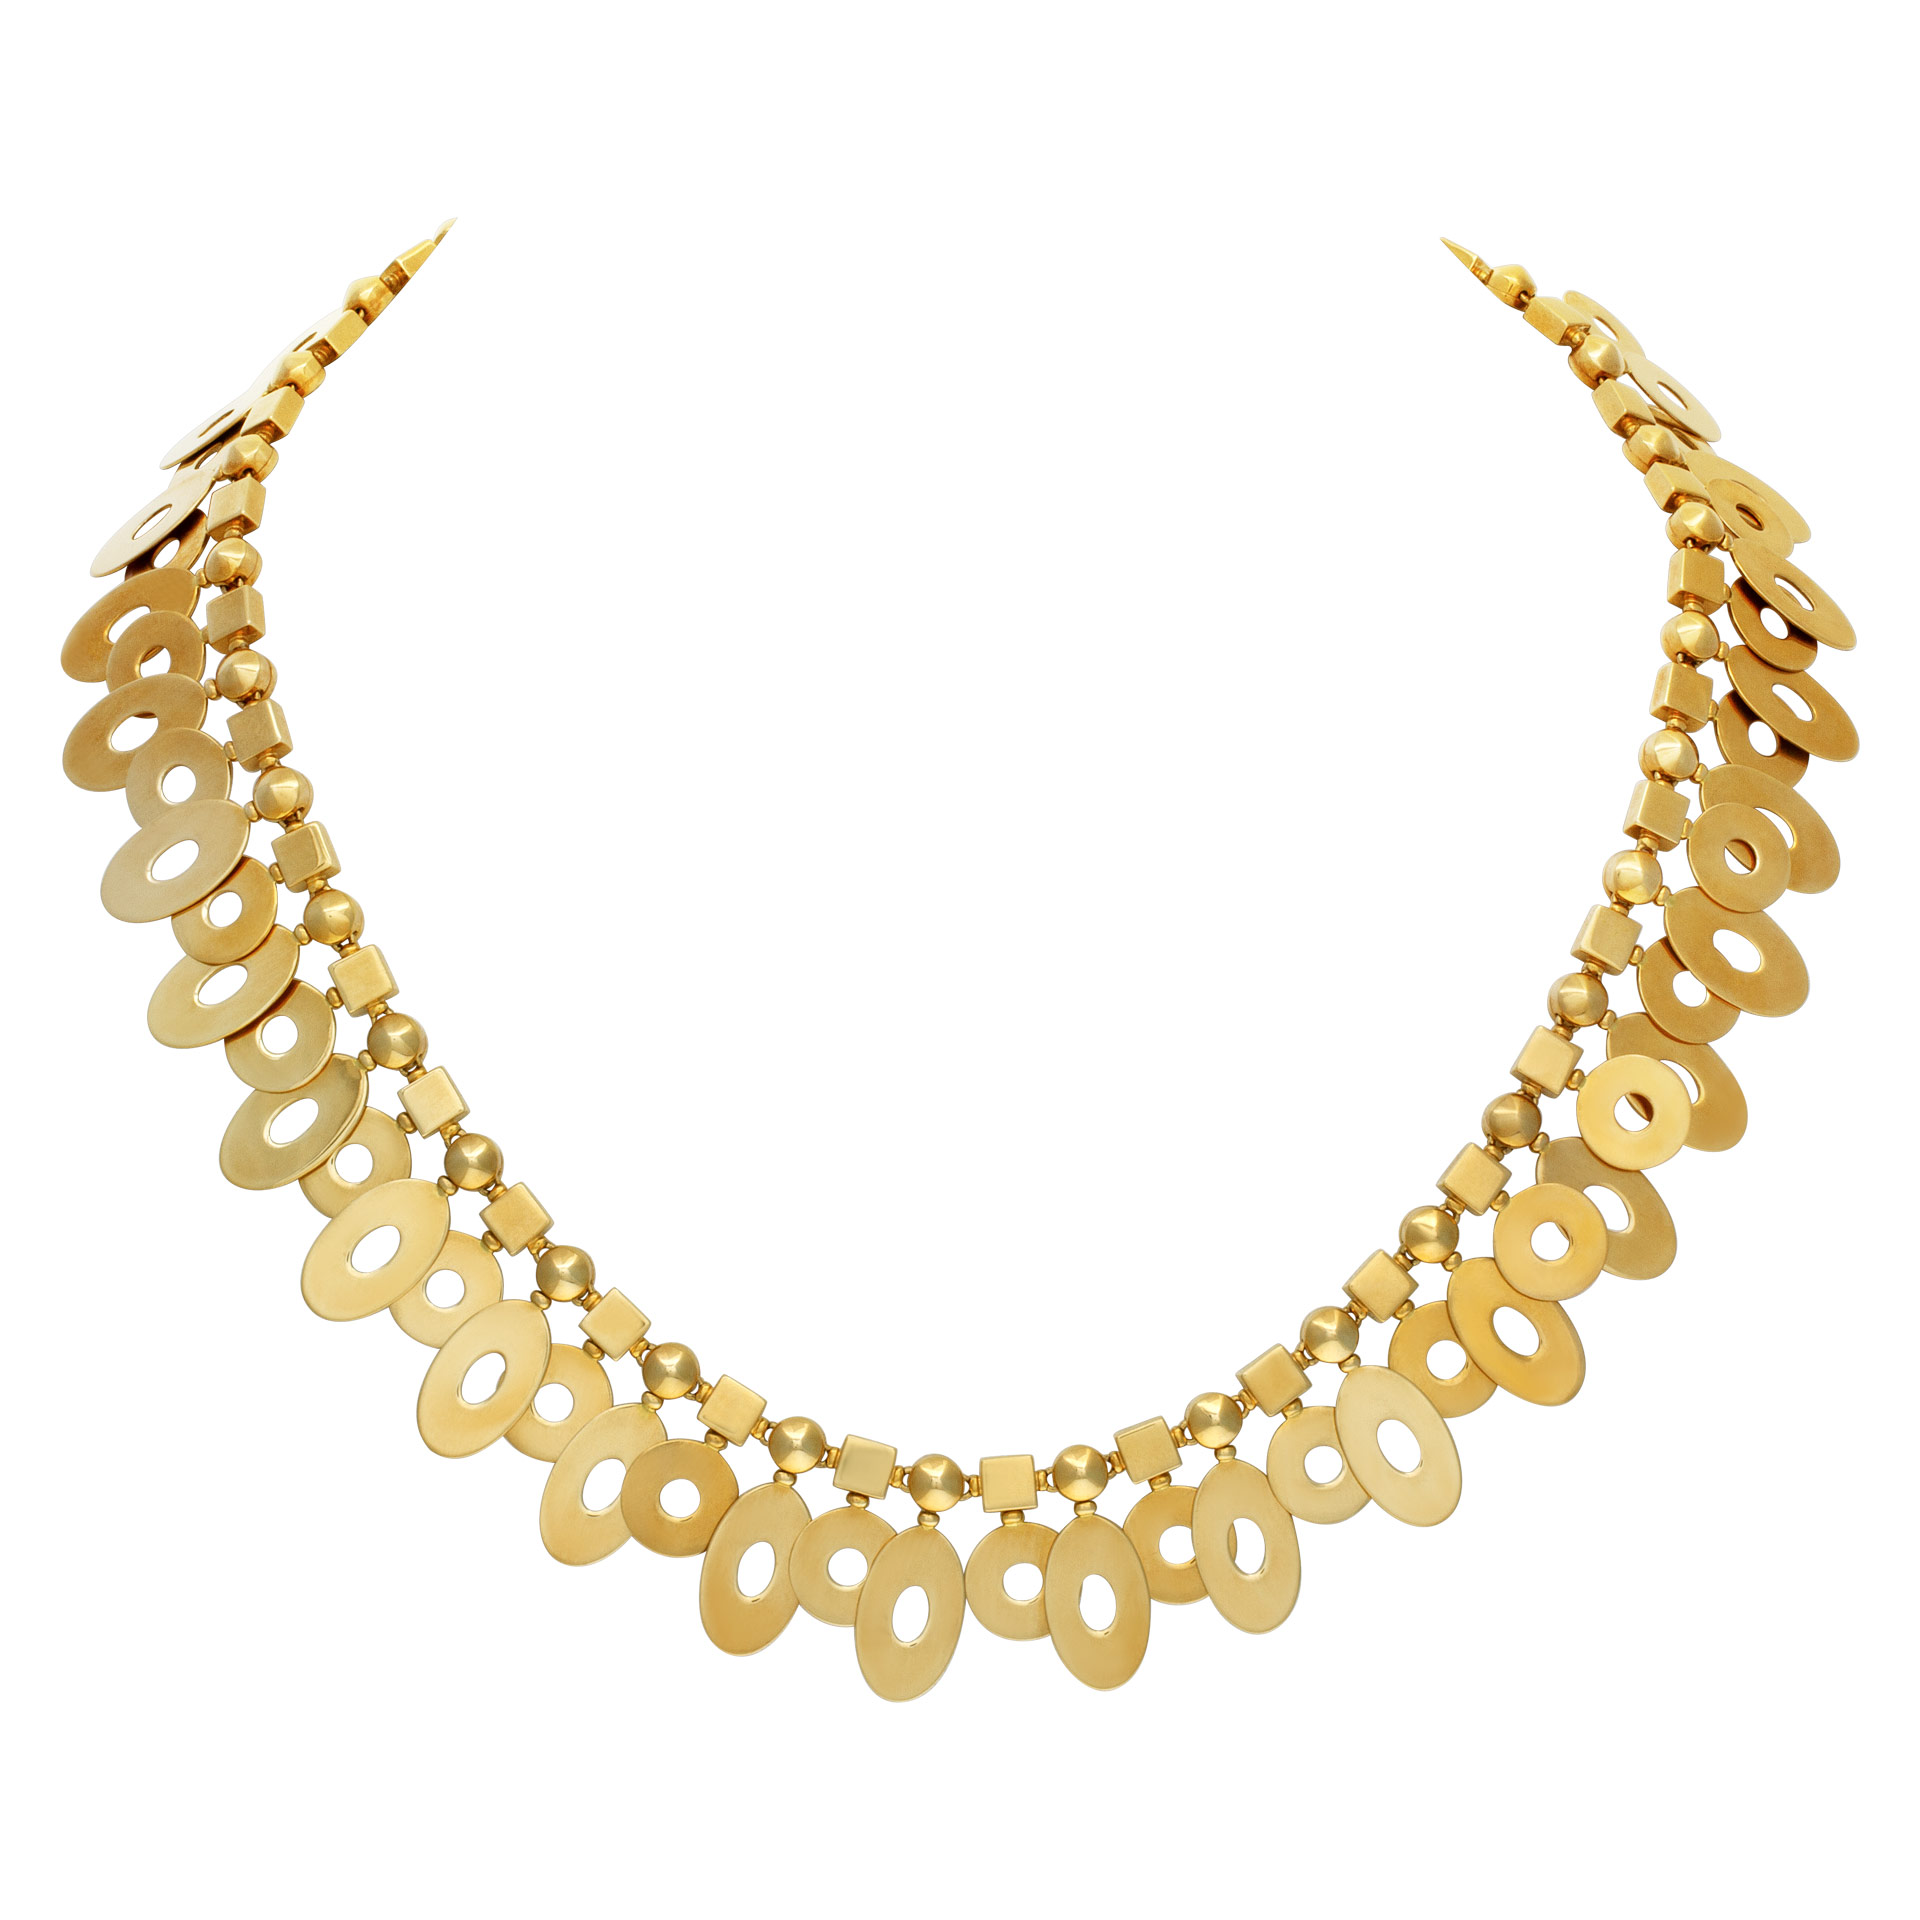 Bvlgari Disc Necklace in 18k yellow gold